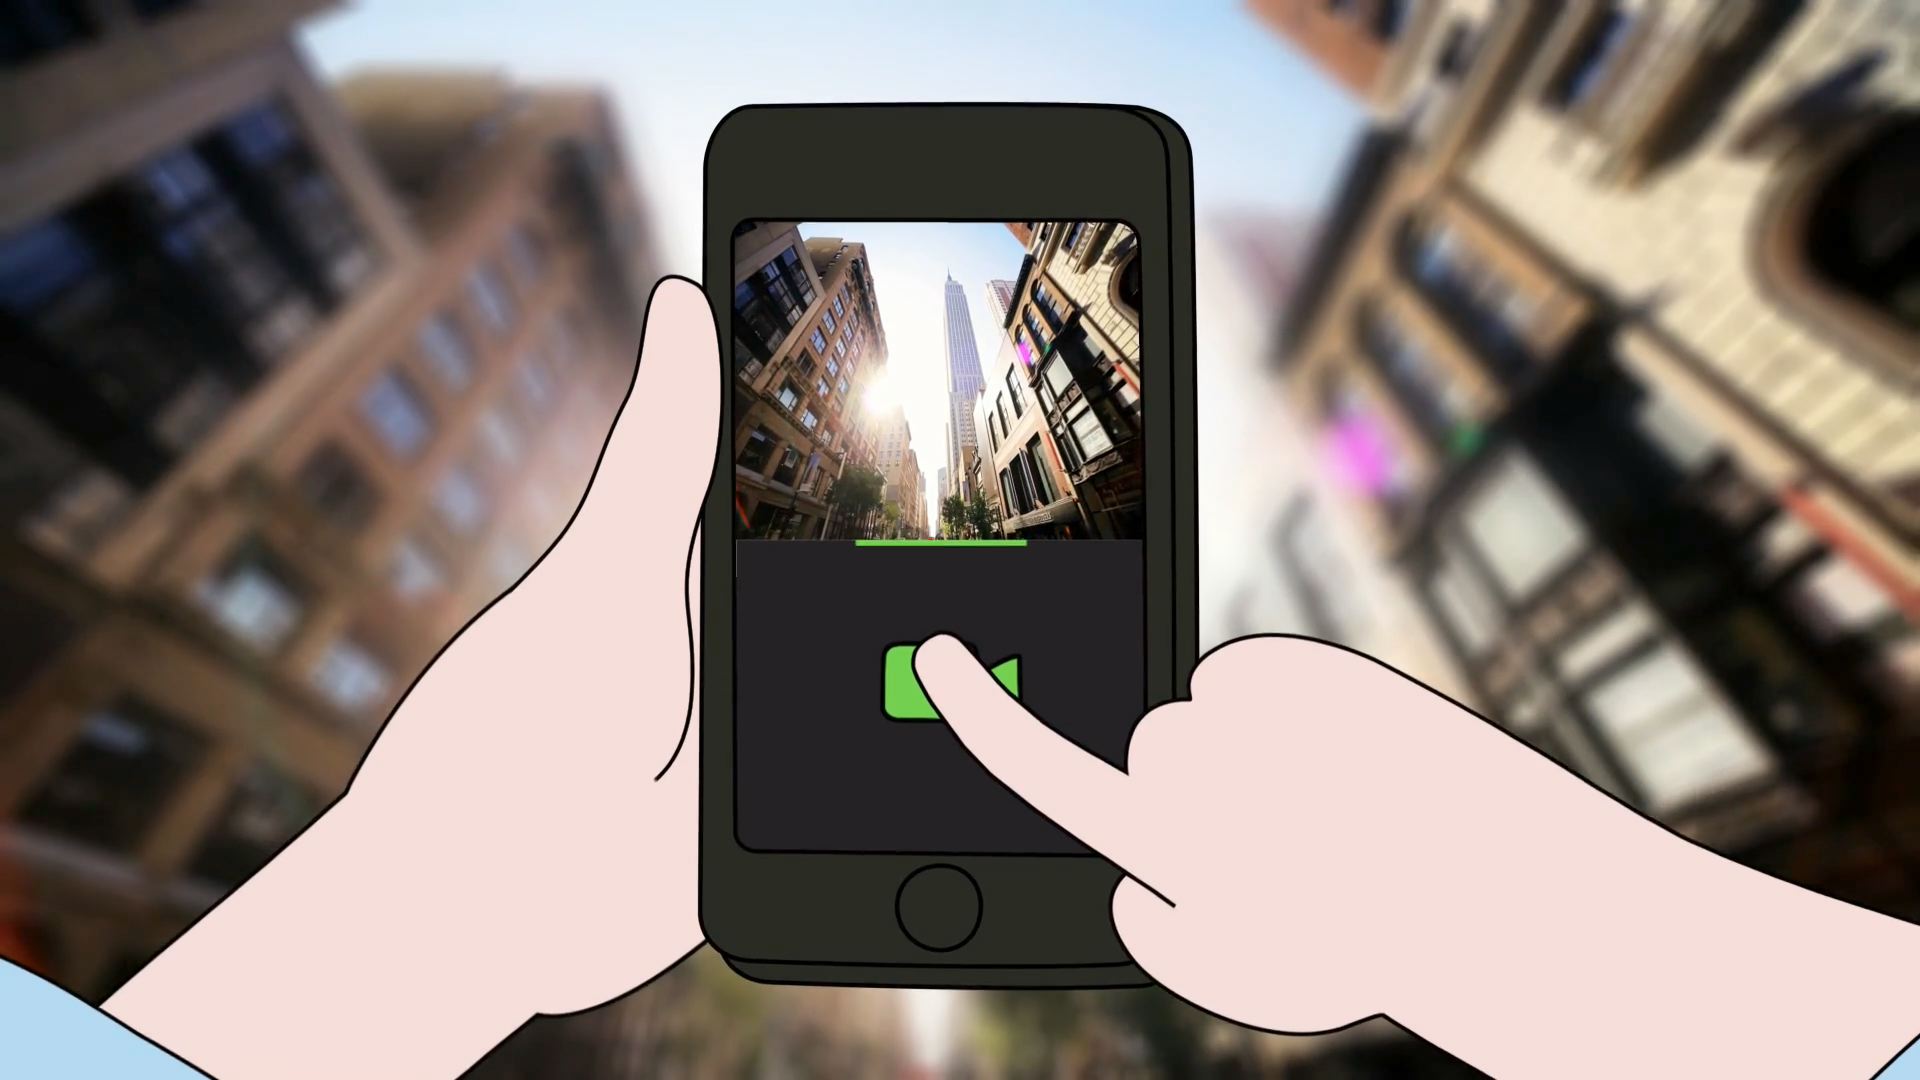 A 2D animated phone capturing a live-action video of a city scene